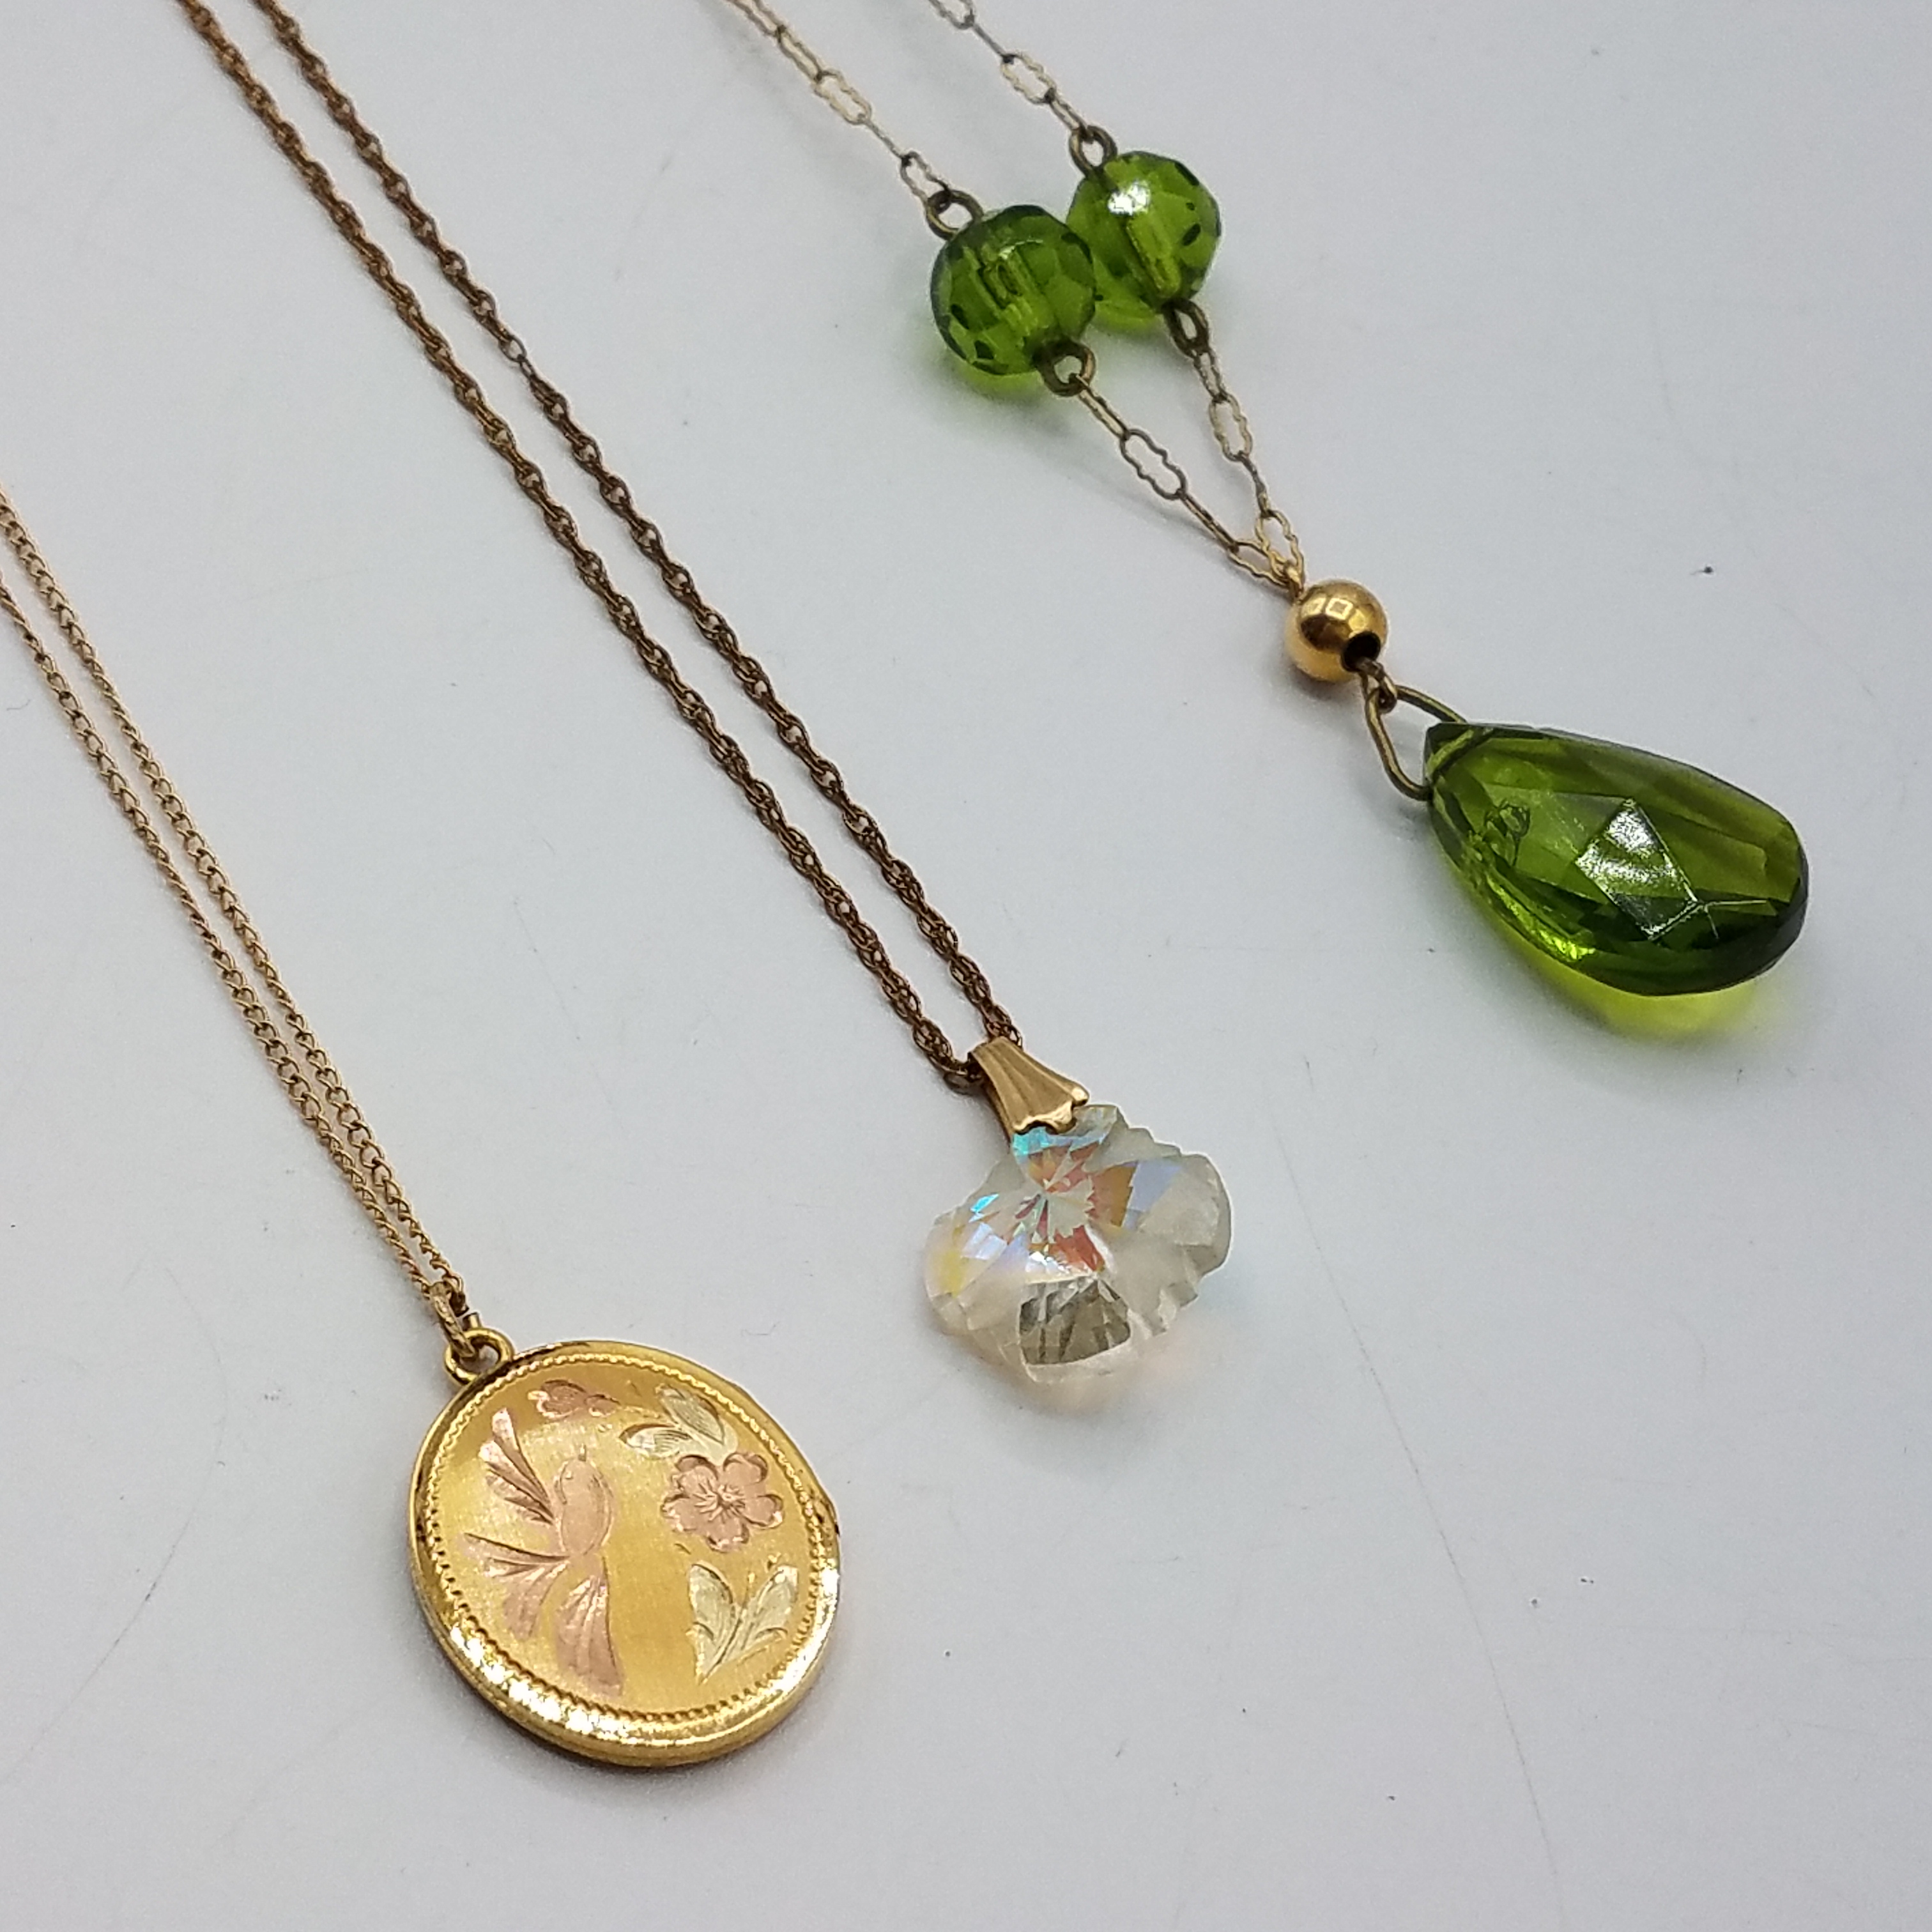 Buy the Yellow Gold Filled + Glass Pendant Necklaces - Lot of 3 Pieces ...